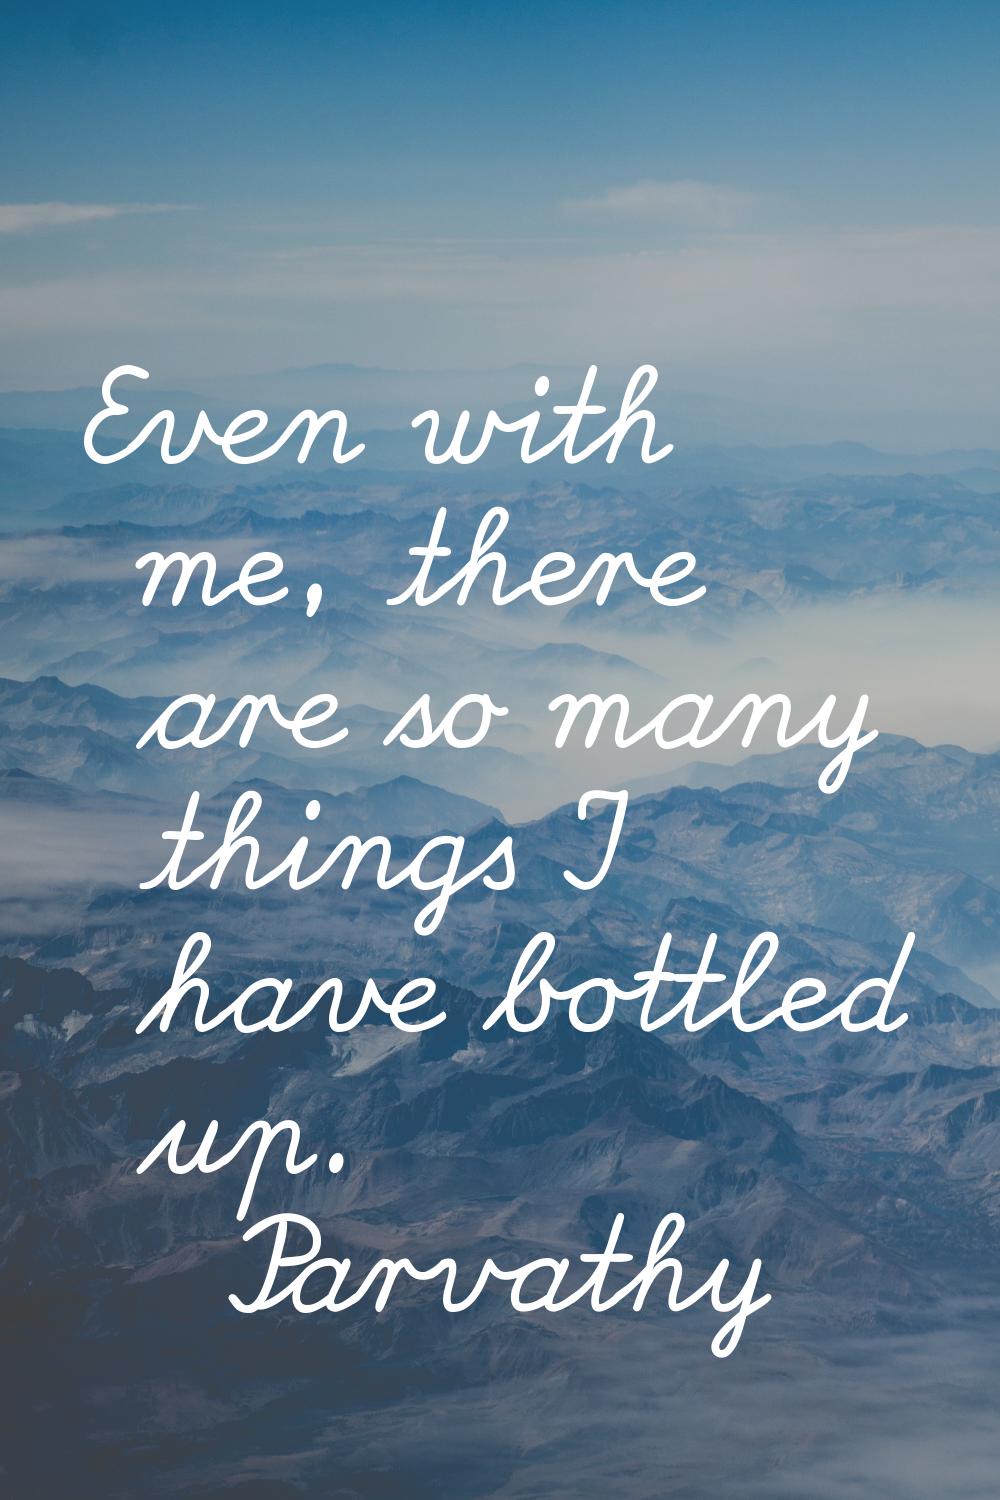 Even with me, there are so many things I have bottled up.